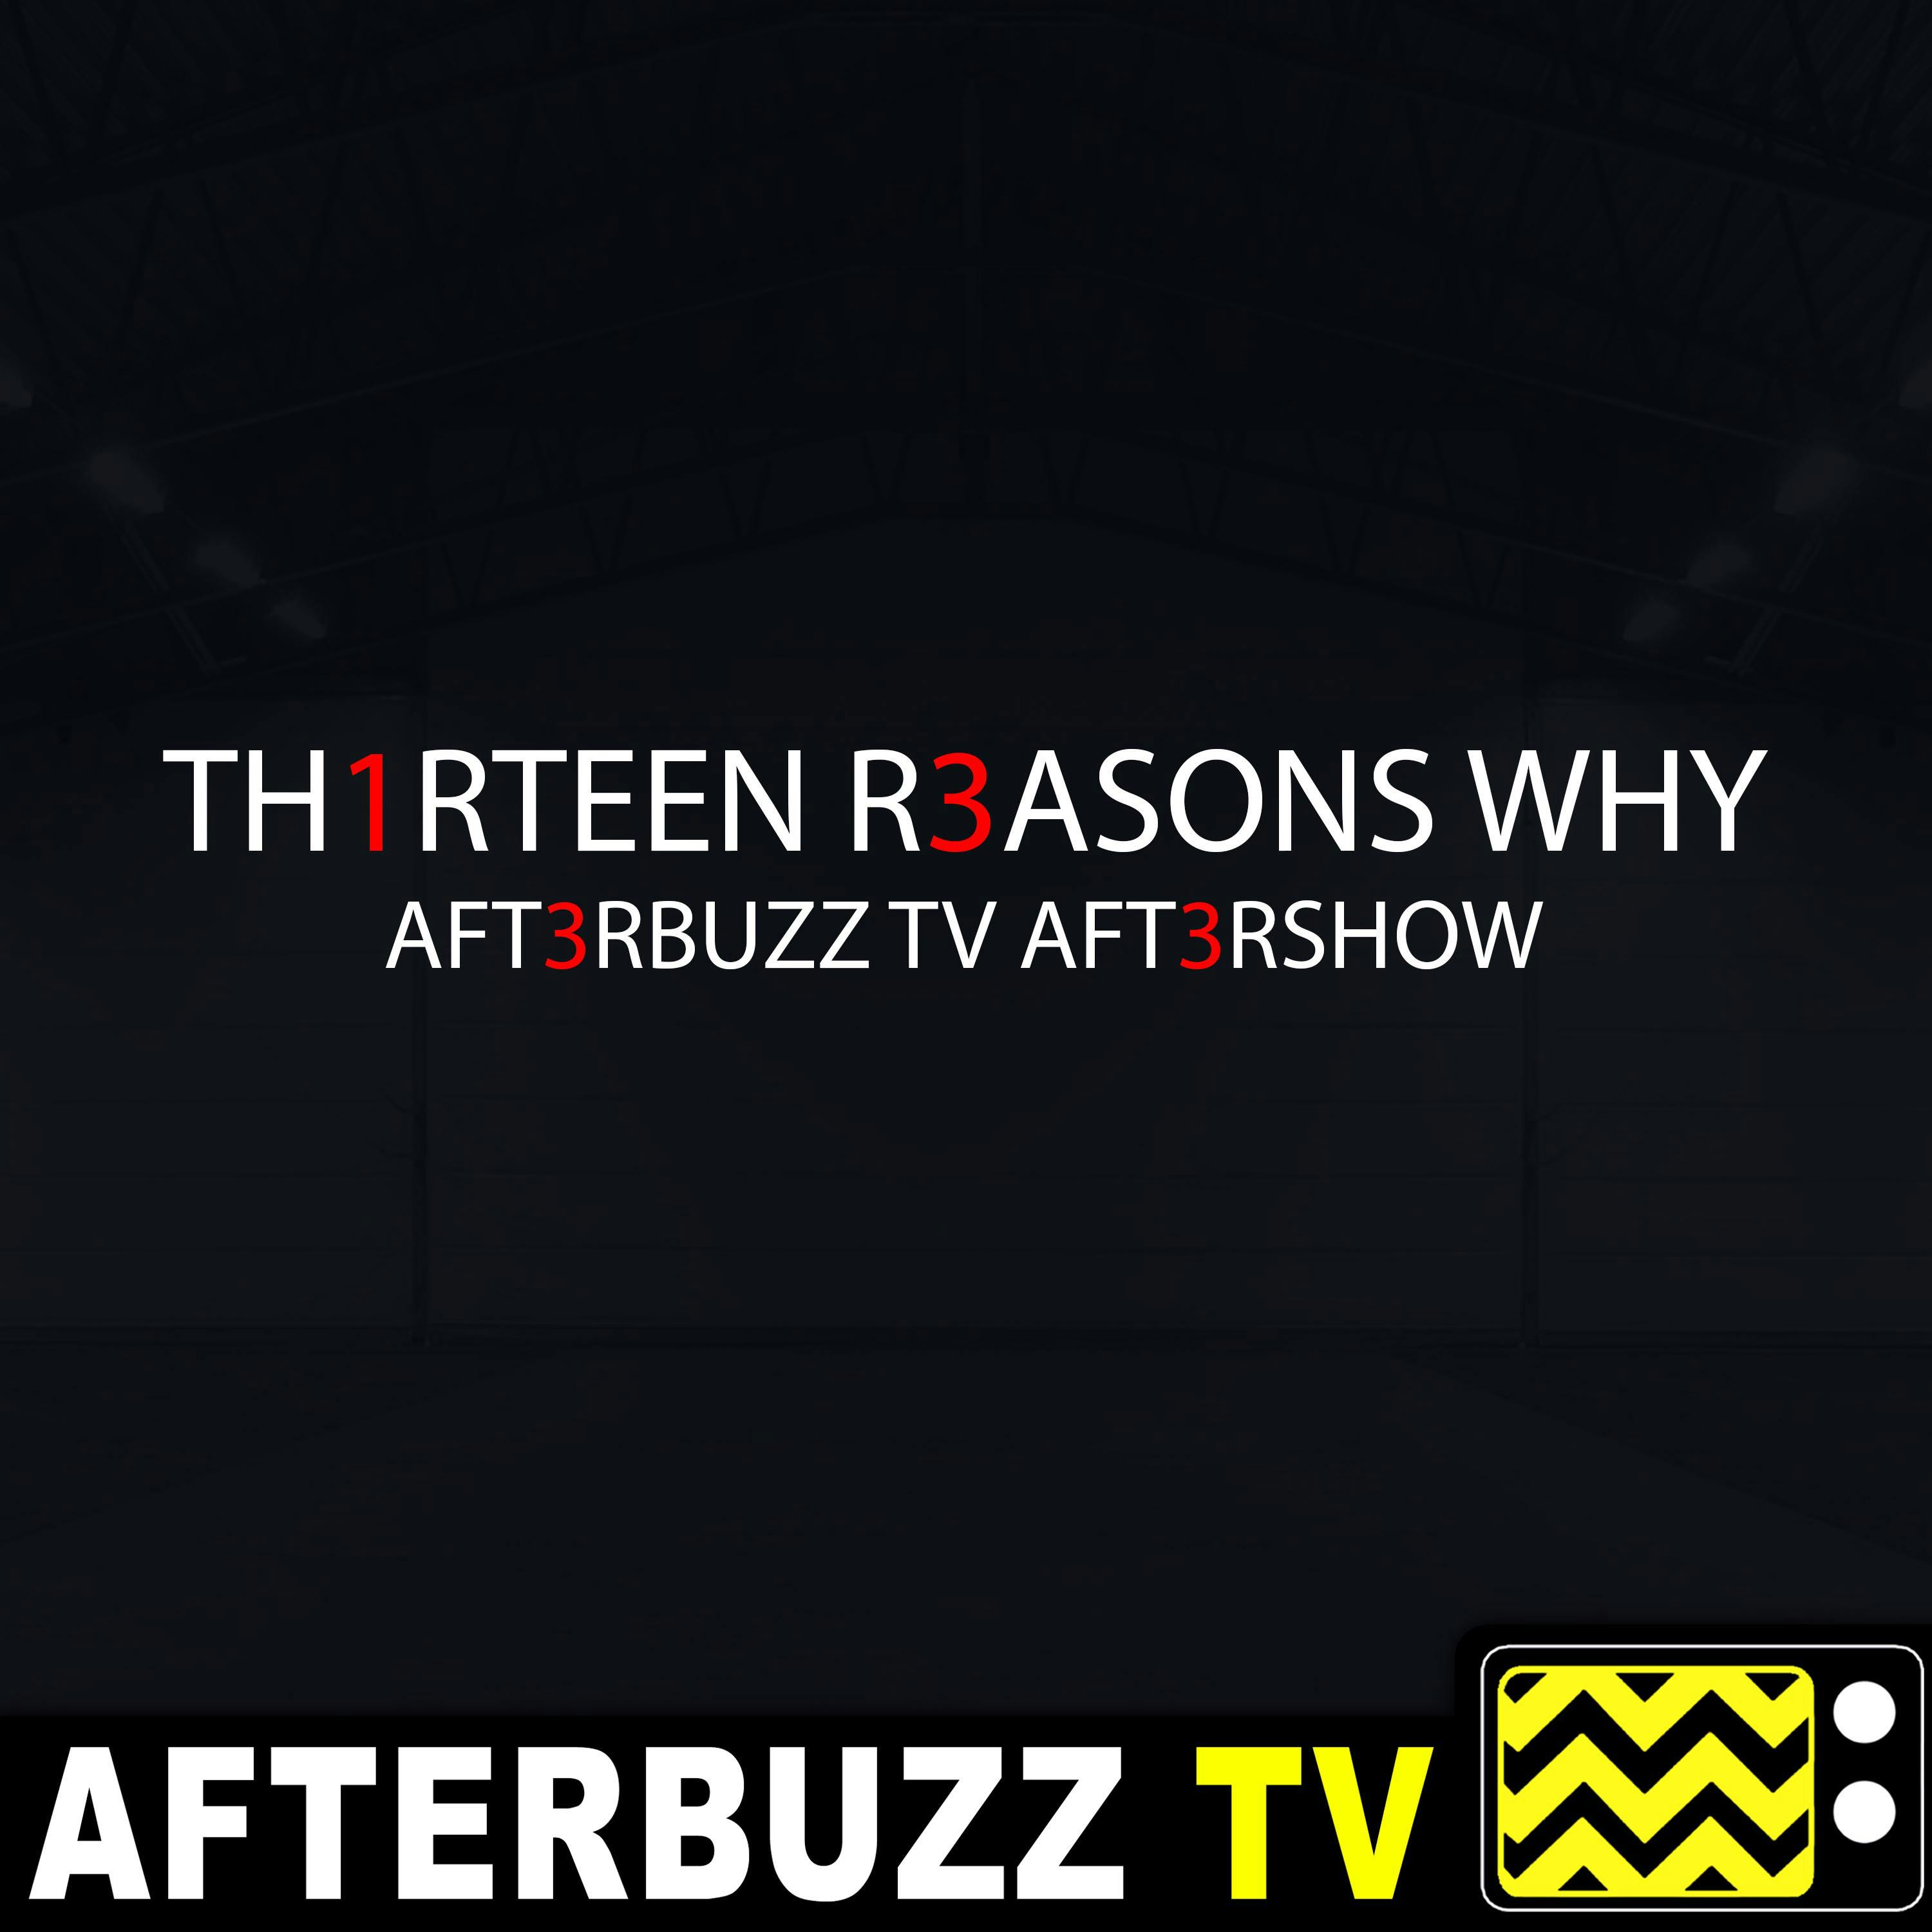 ”If You’re Breathing, You’re a Liar” Season 3 Episode 2 ’13 Reasons Why’ Review